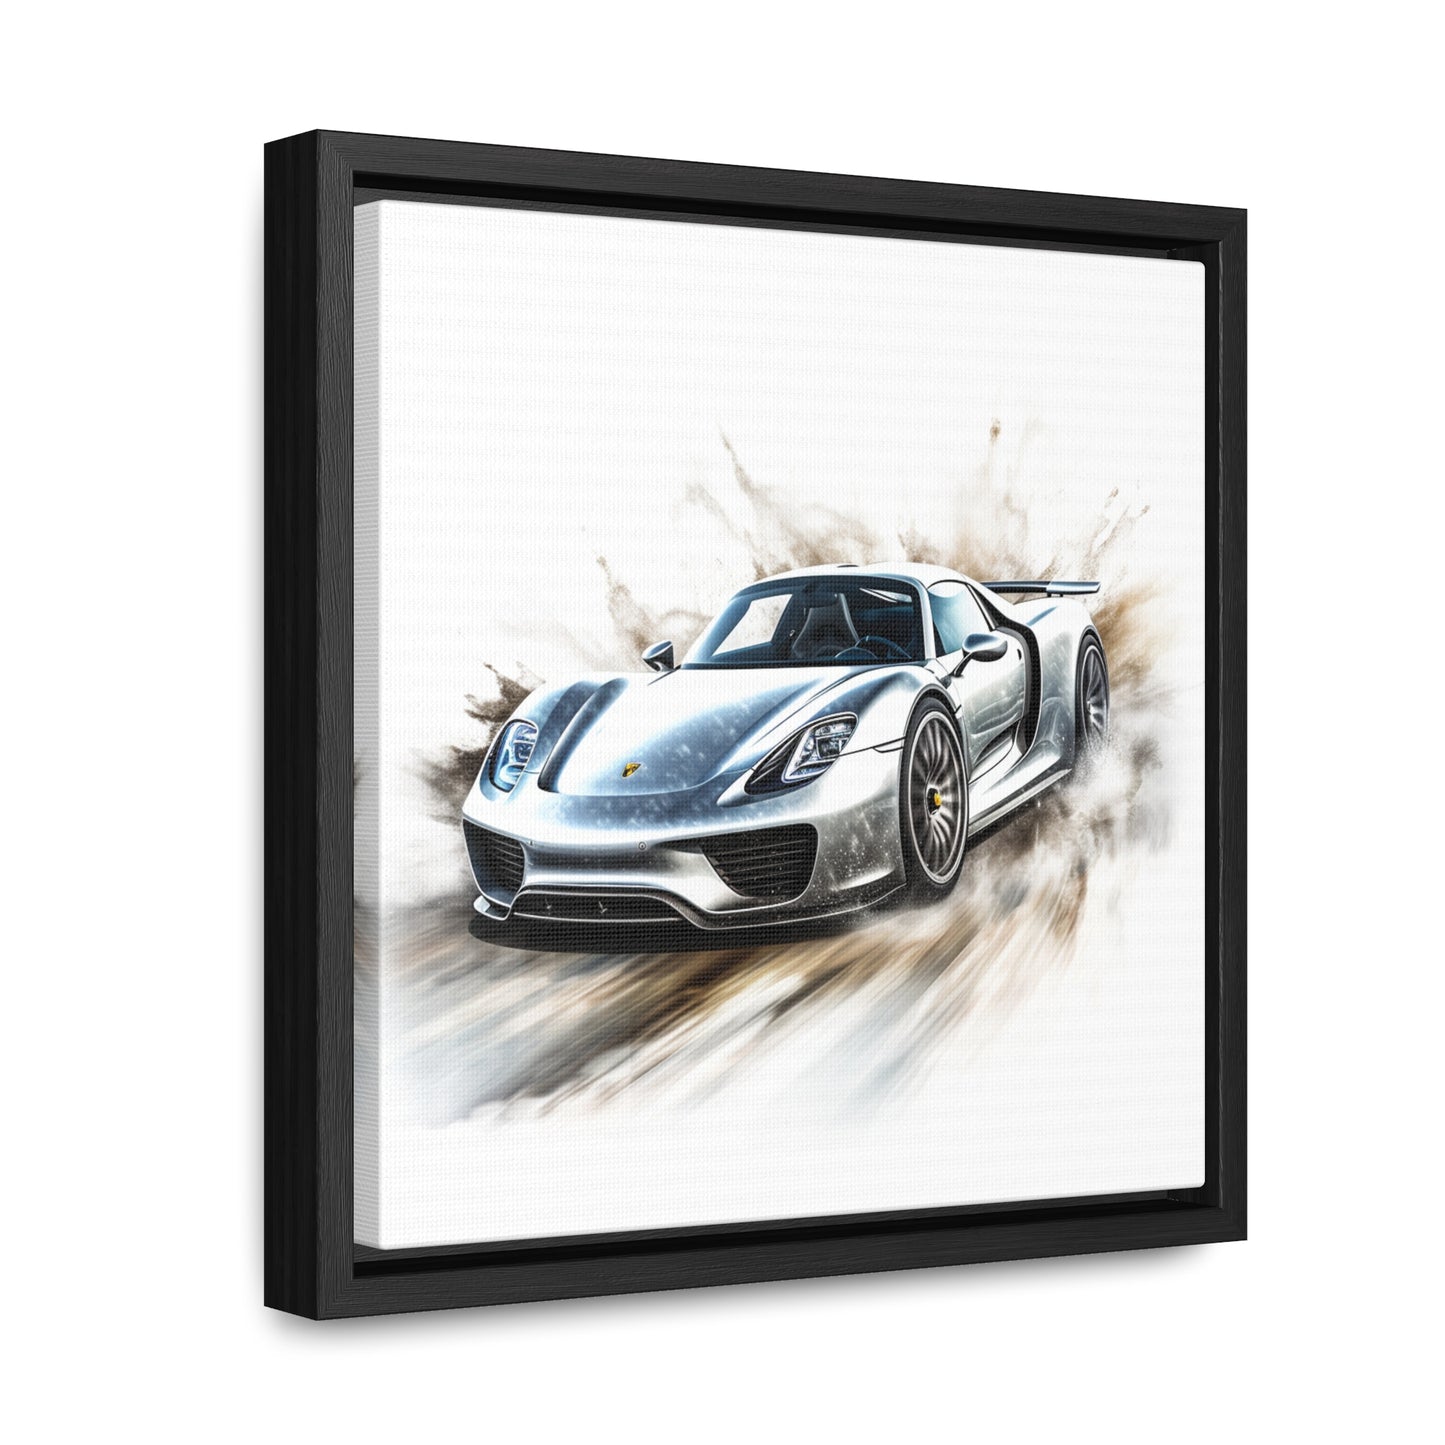 Gallery Canvas Wraps, Square Frame 918 Spyder white background driving fast with water splashing 2